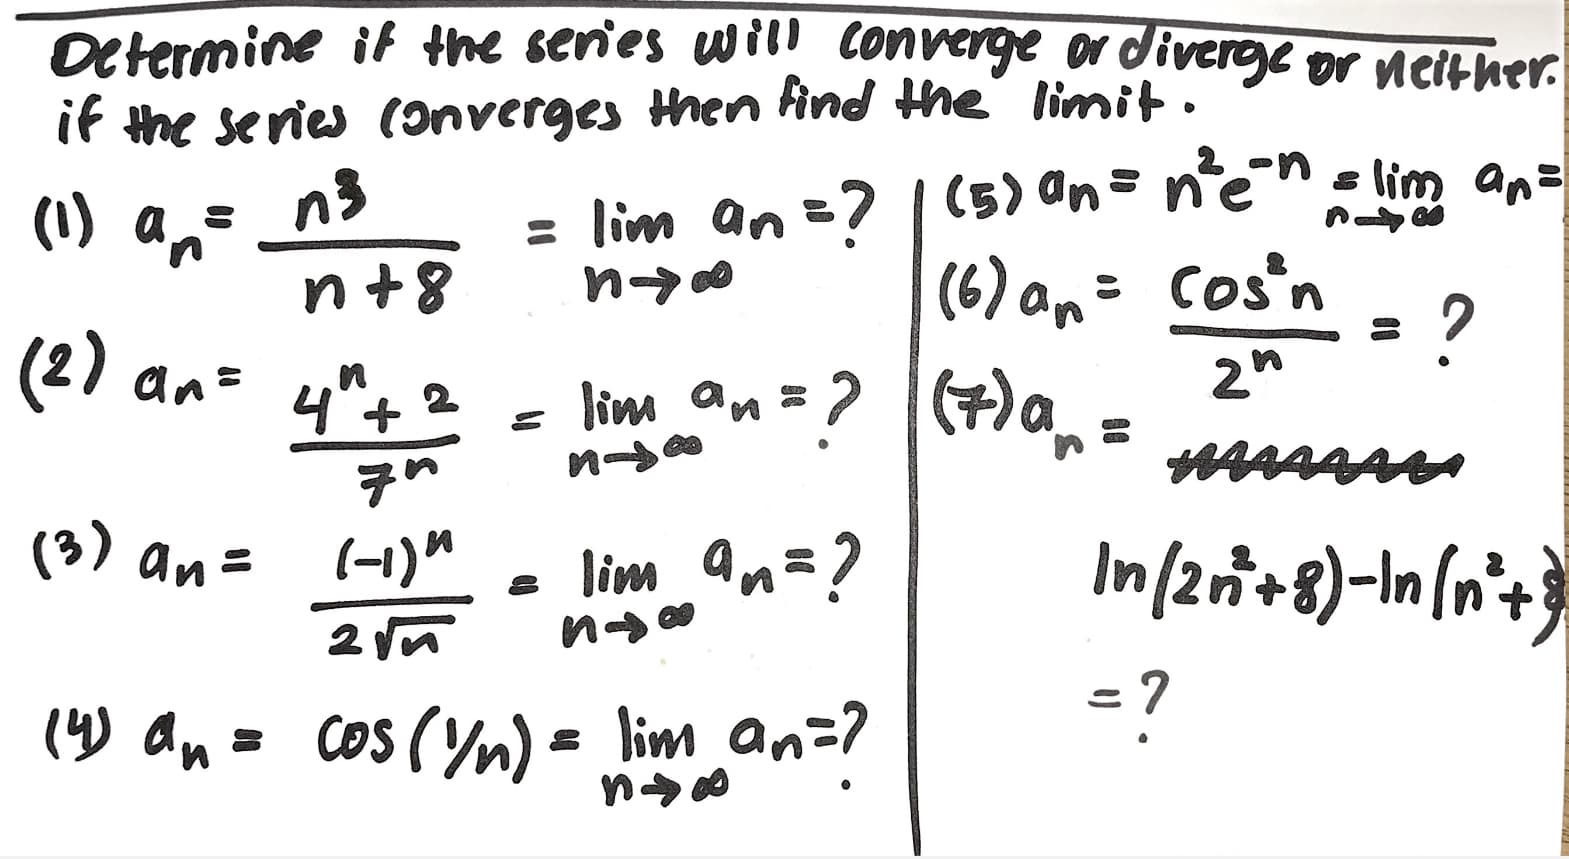 Determine it the series will converge or divere or nelther.
if the series (onverges then find the limit.
= lim an =? | (5) an= n'ene lim an=
(6) an= Cos'n - 2
n3
(1) an
n+8
?
(2)
2"
an=
lim an=?
(7)a
4"+ 2
of
иo
(3) an=
In/2ri+8)-In(n*+
lim an=?
(-1)"
=?
(4) an
cos (ym) = lim an=?
